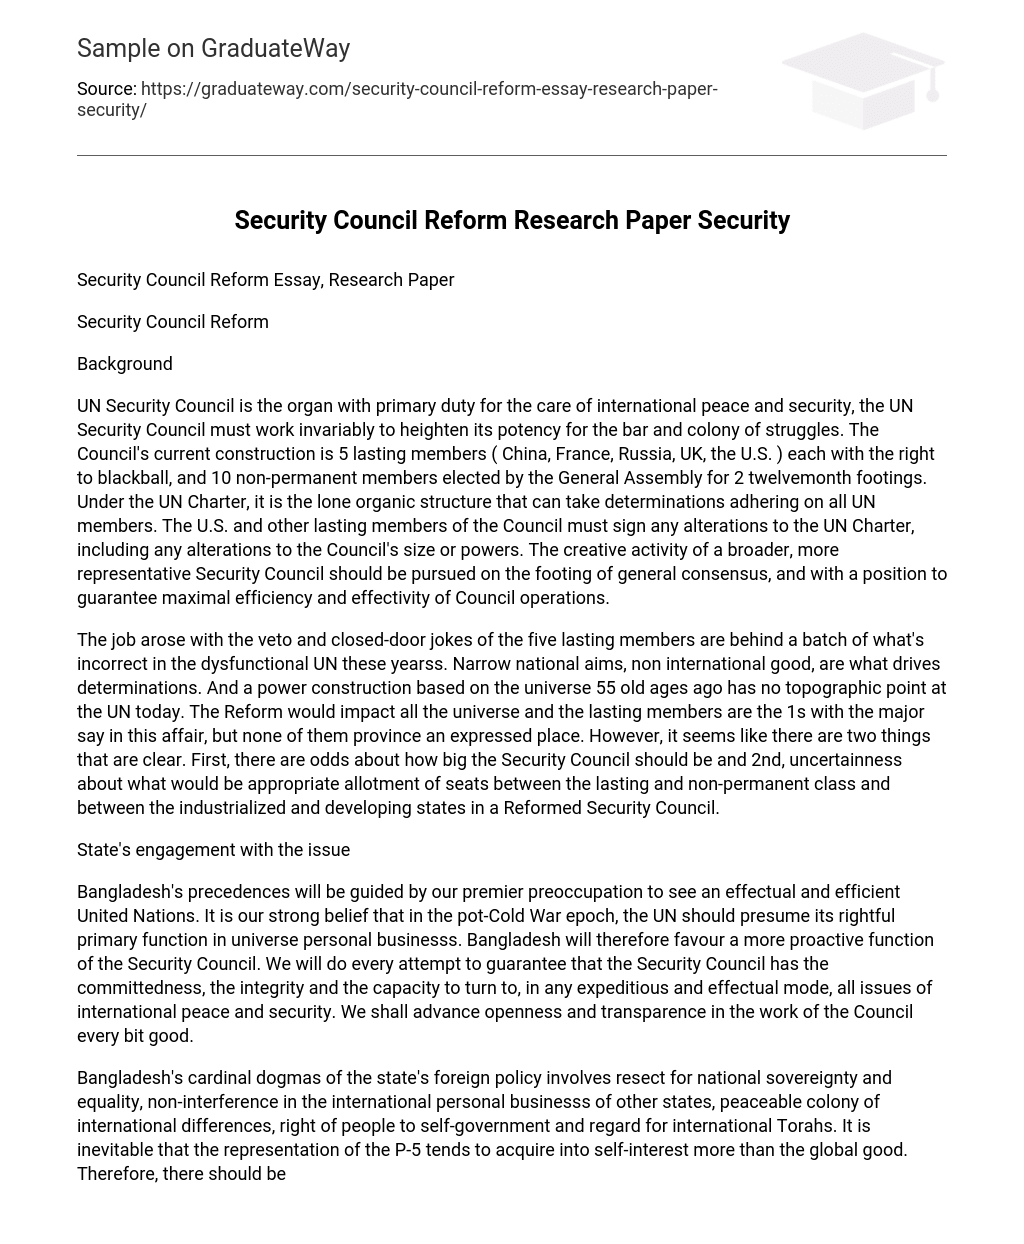 Security Council Reform Research Paper Security